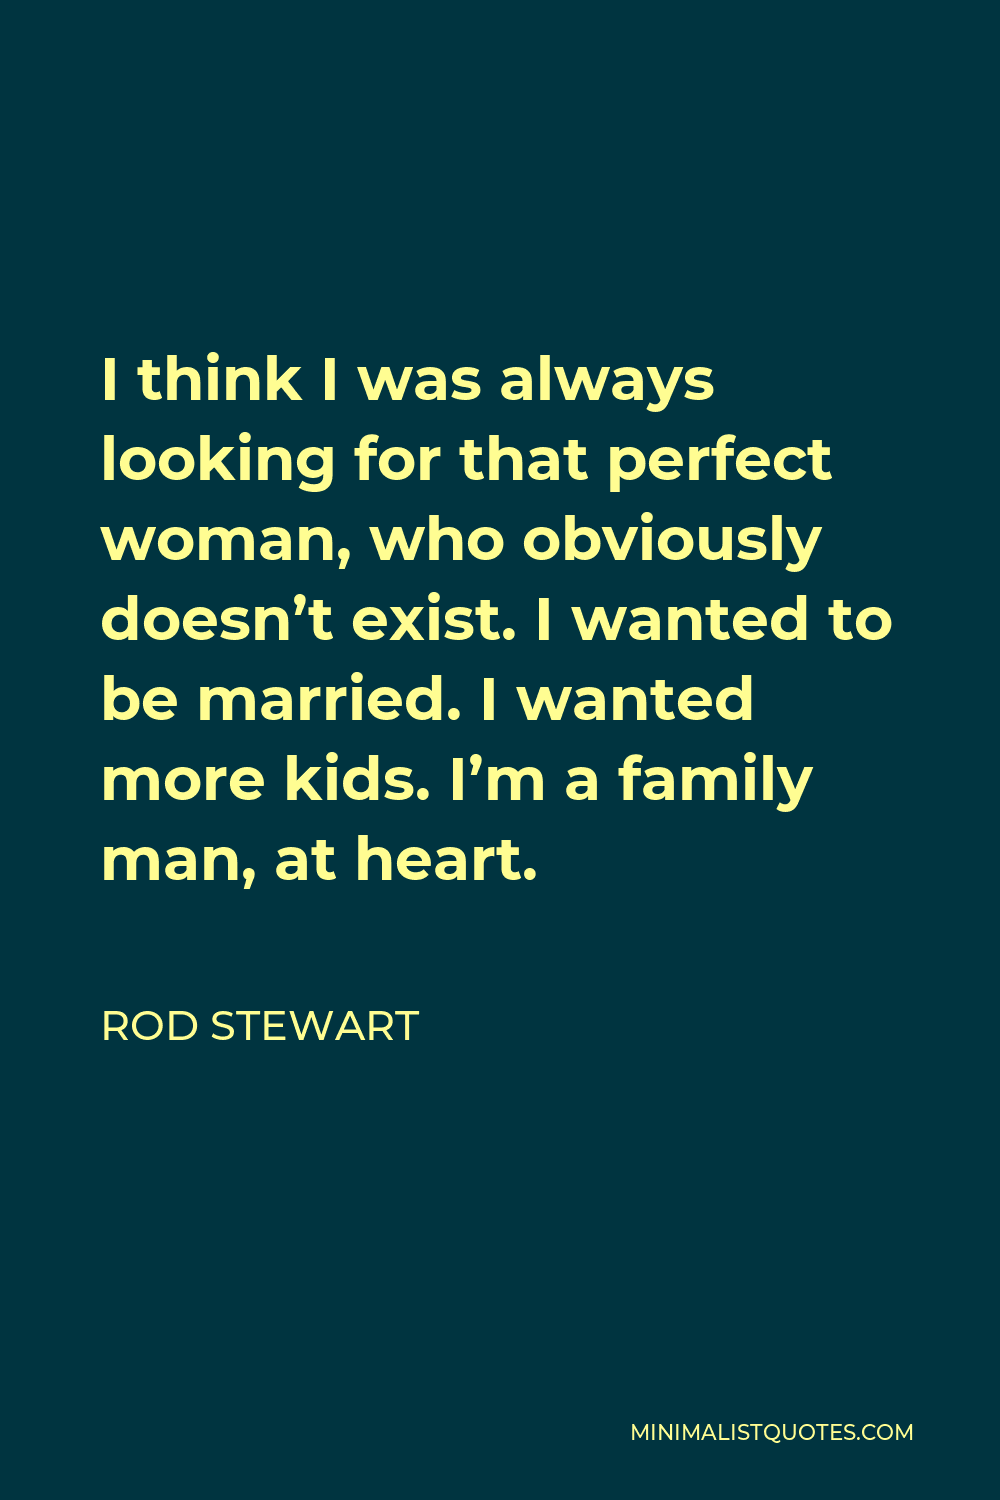 Rod Stewart Quote - I think I was always looking for that perfect woman, who obviously doesn’t exist. I wanted to be married. I wanted more kids. I’m a family man, at heart.